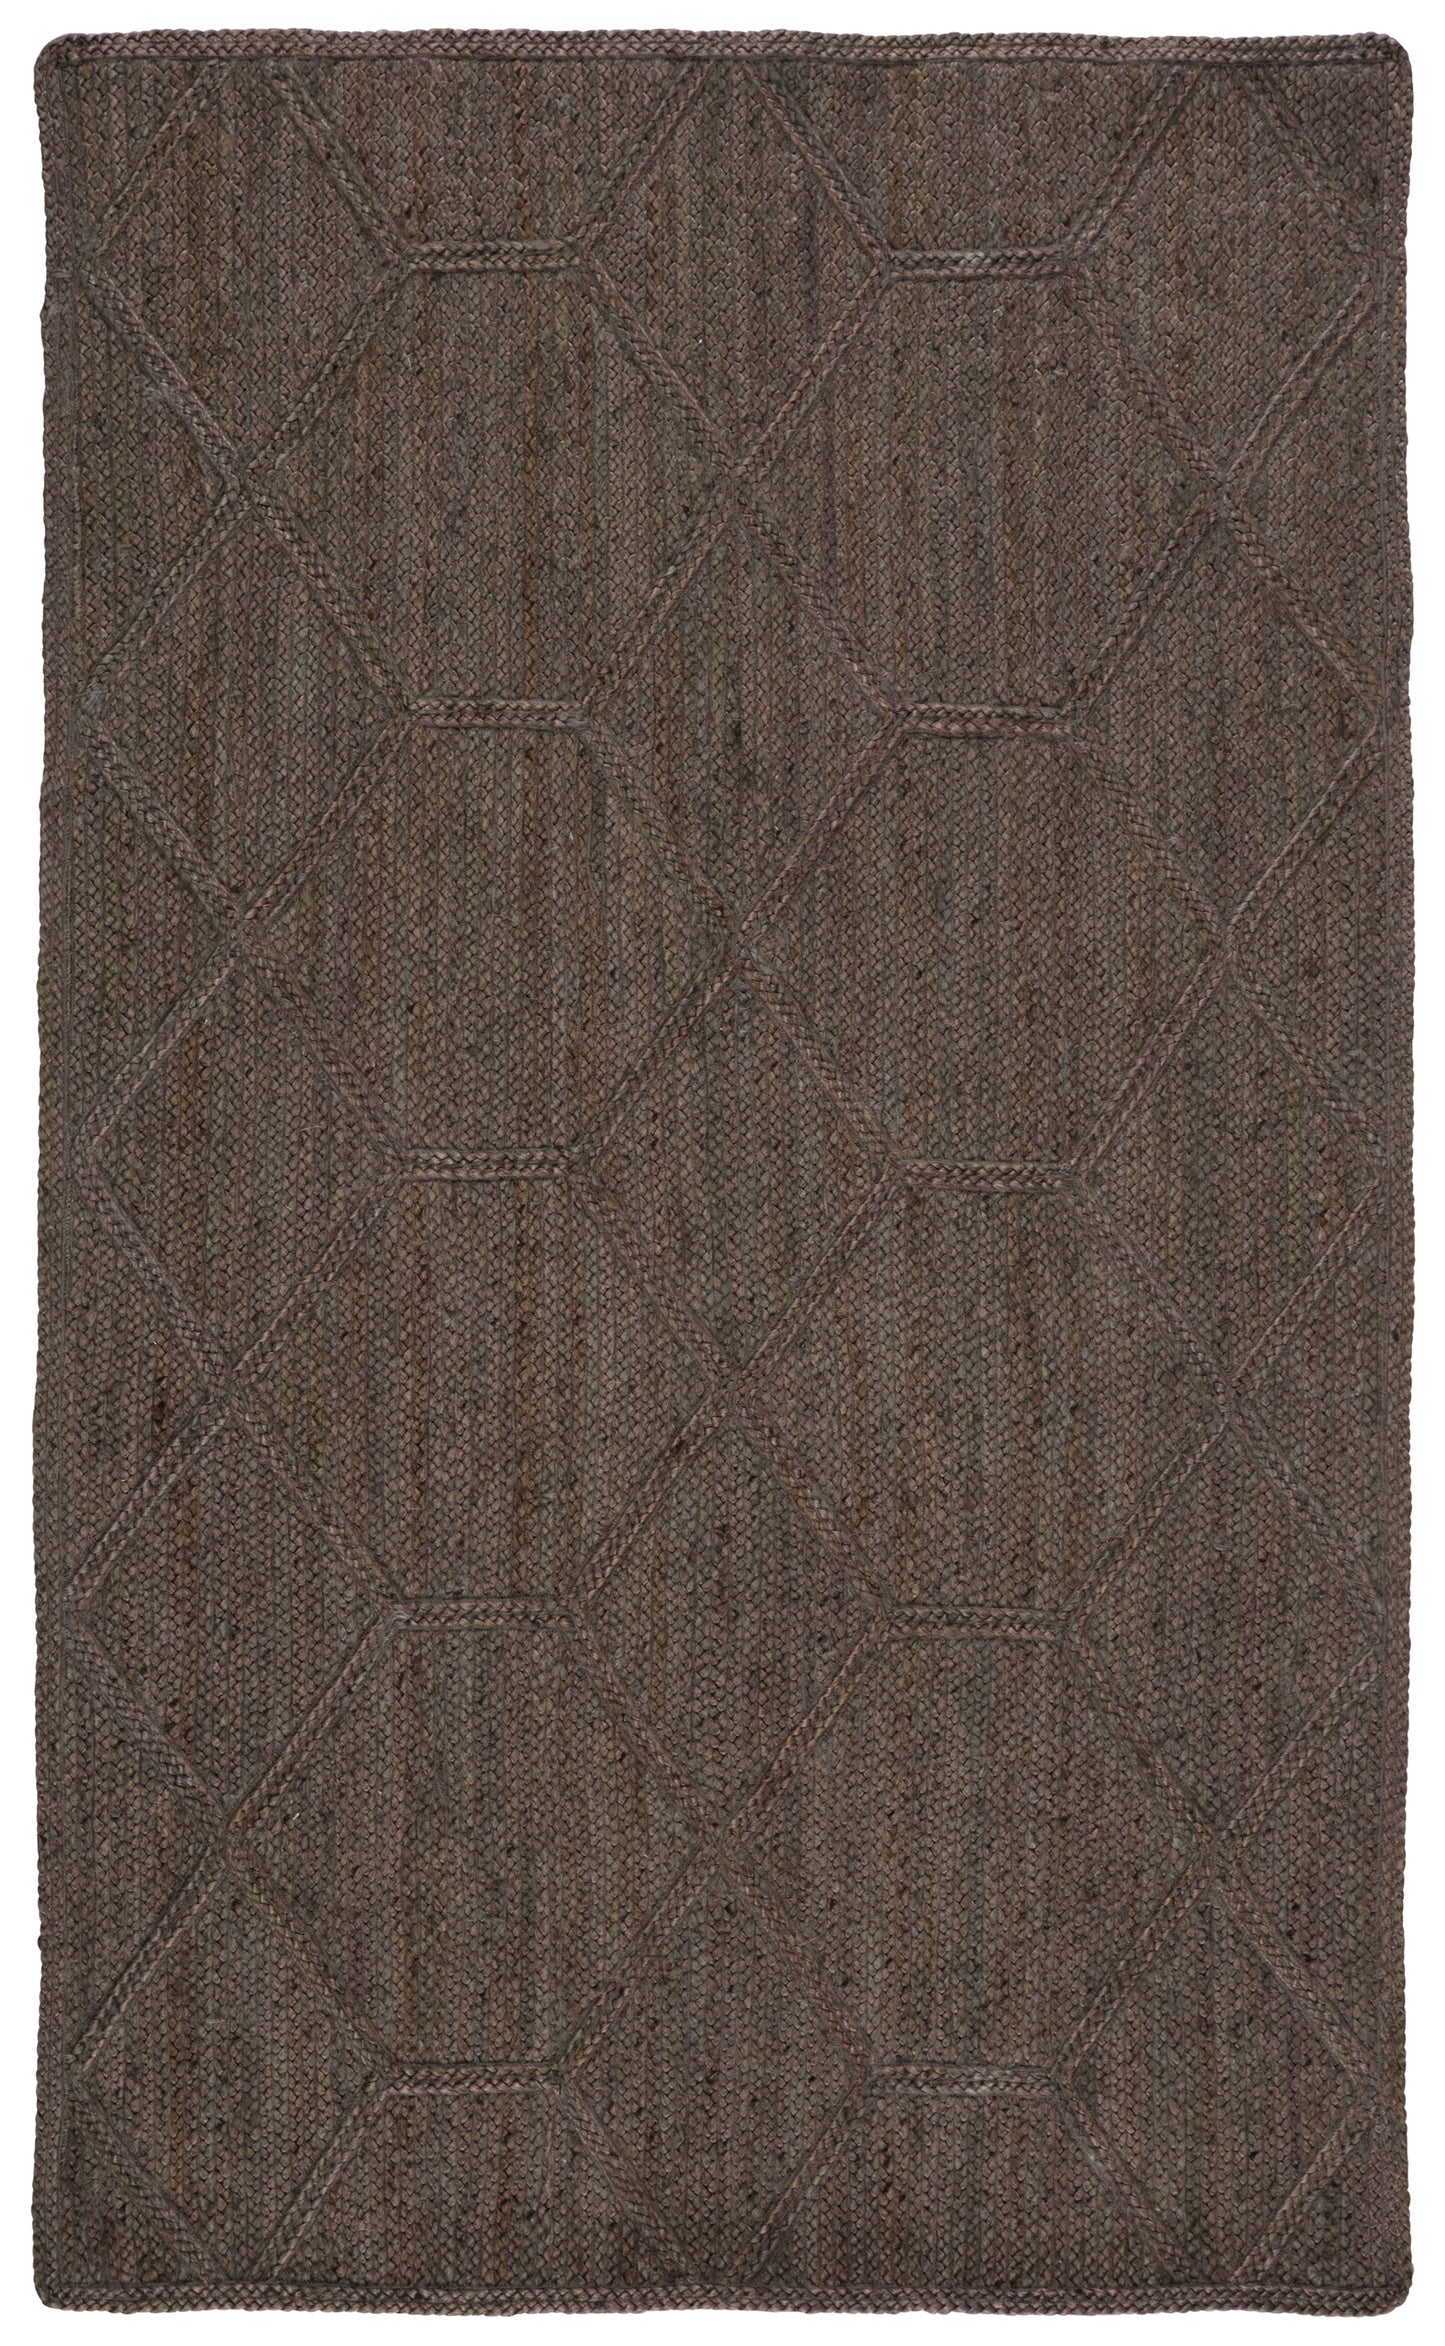 Naturals Tobago Ponce Handmade Jute Indoor Area Rug From Jaipur Living